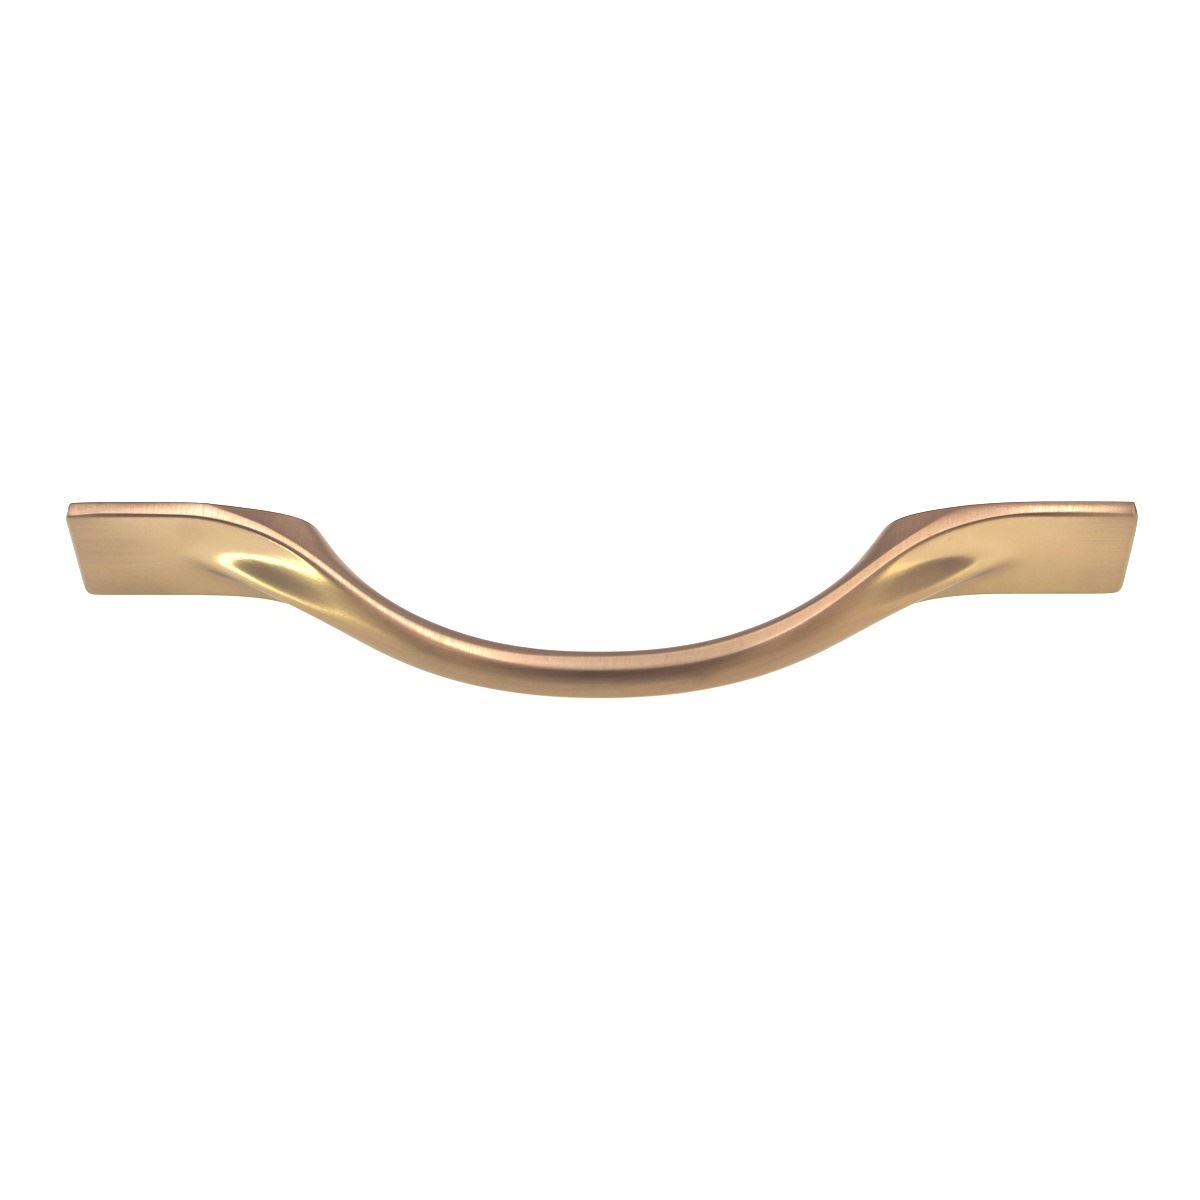 Amerock Uprise 3 3/4" (96mm) Ctr Cabinet Arch Pull Champagne Bronze BP36917CZ